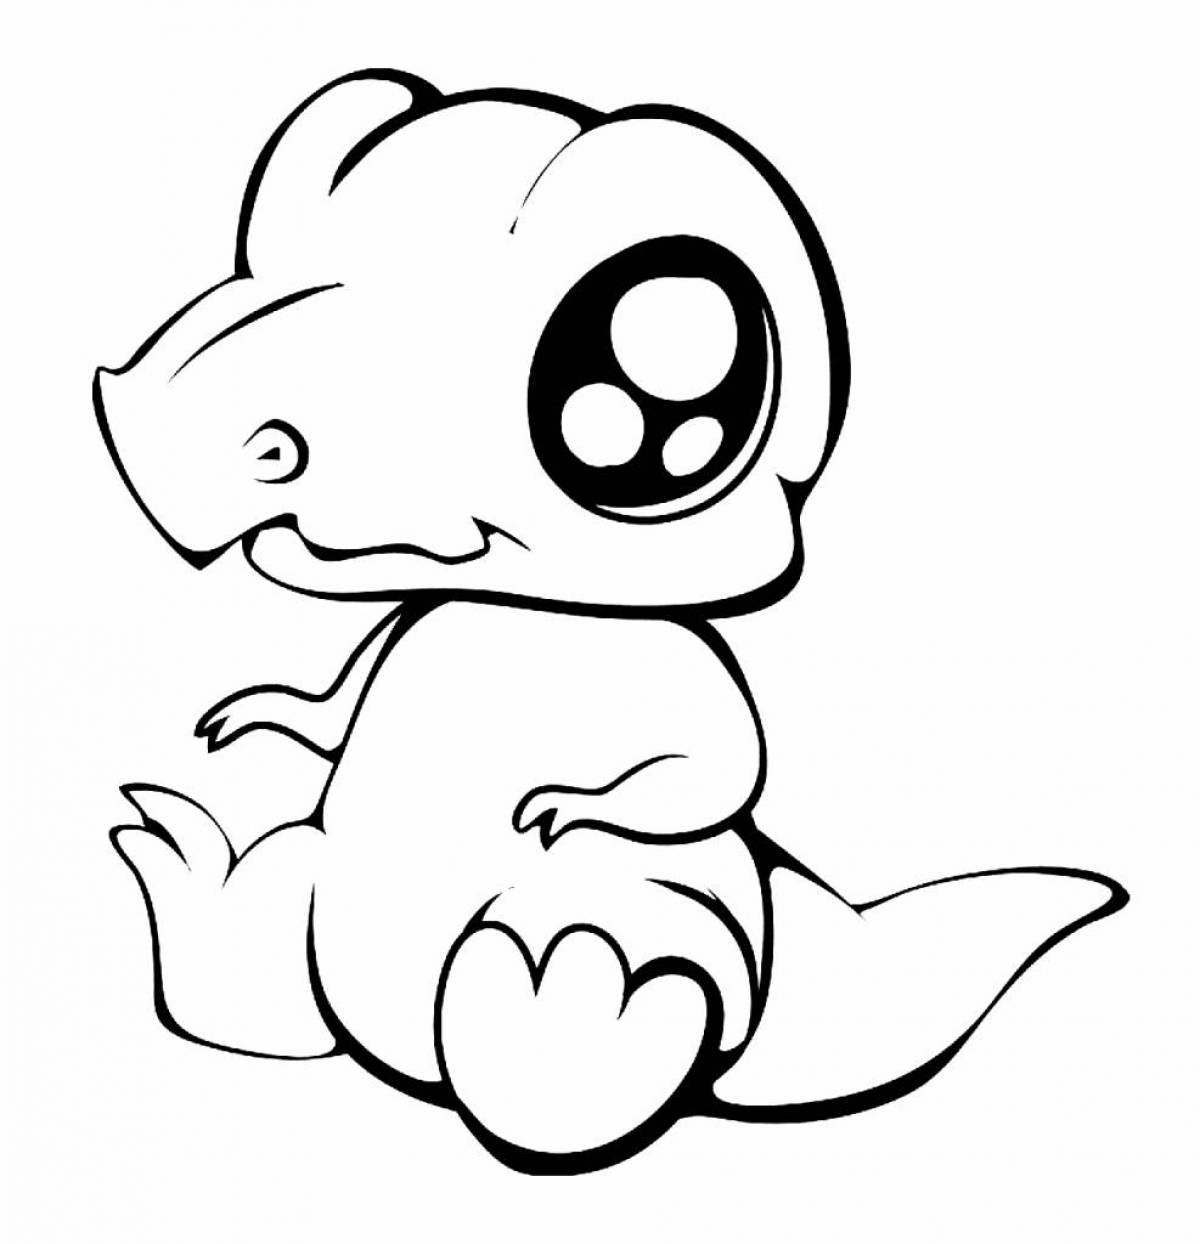 Cute coloring pages cute animals